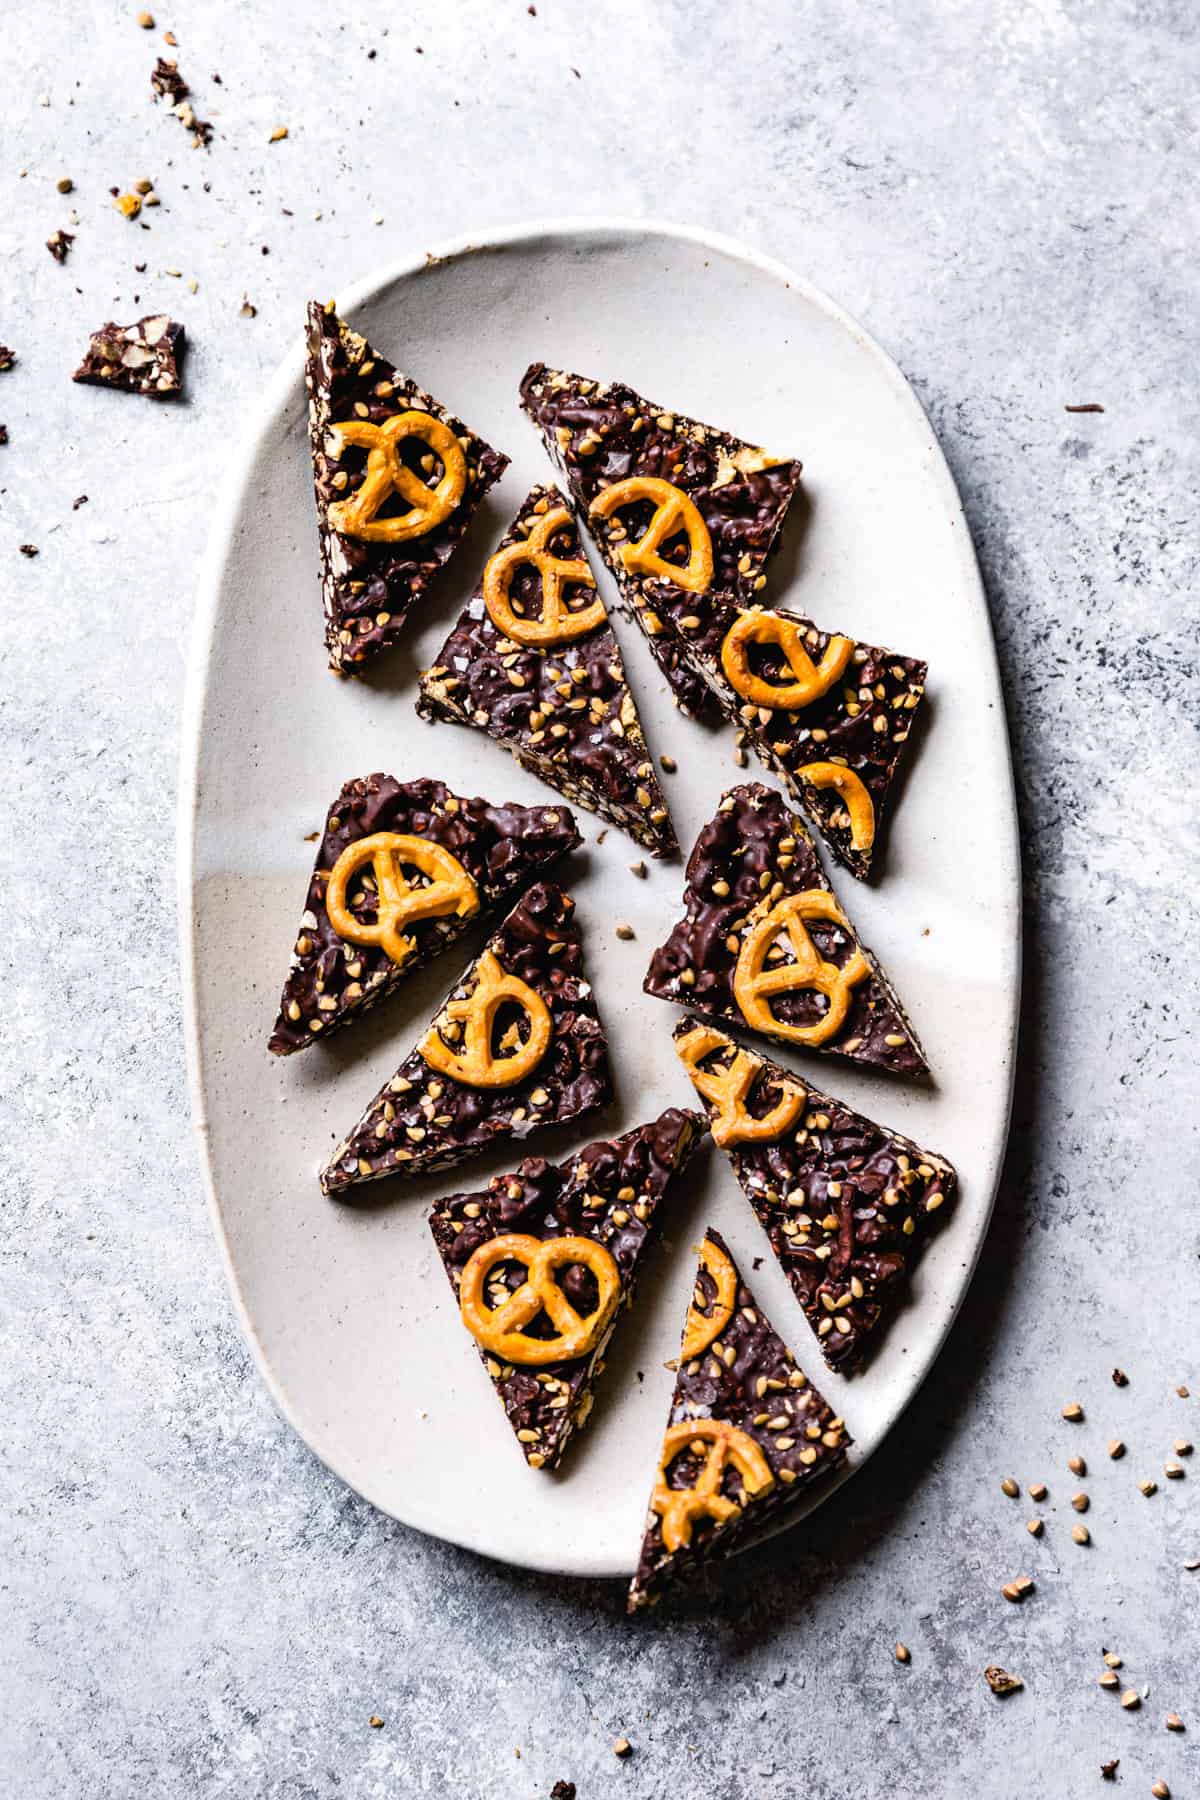 Chocolate bark with pretzels, candied ginger, and toasted buckwheat from Extra Helping | The Bojon Gourmet